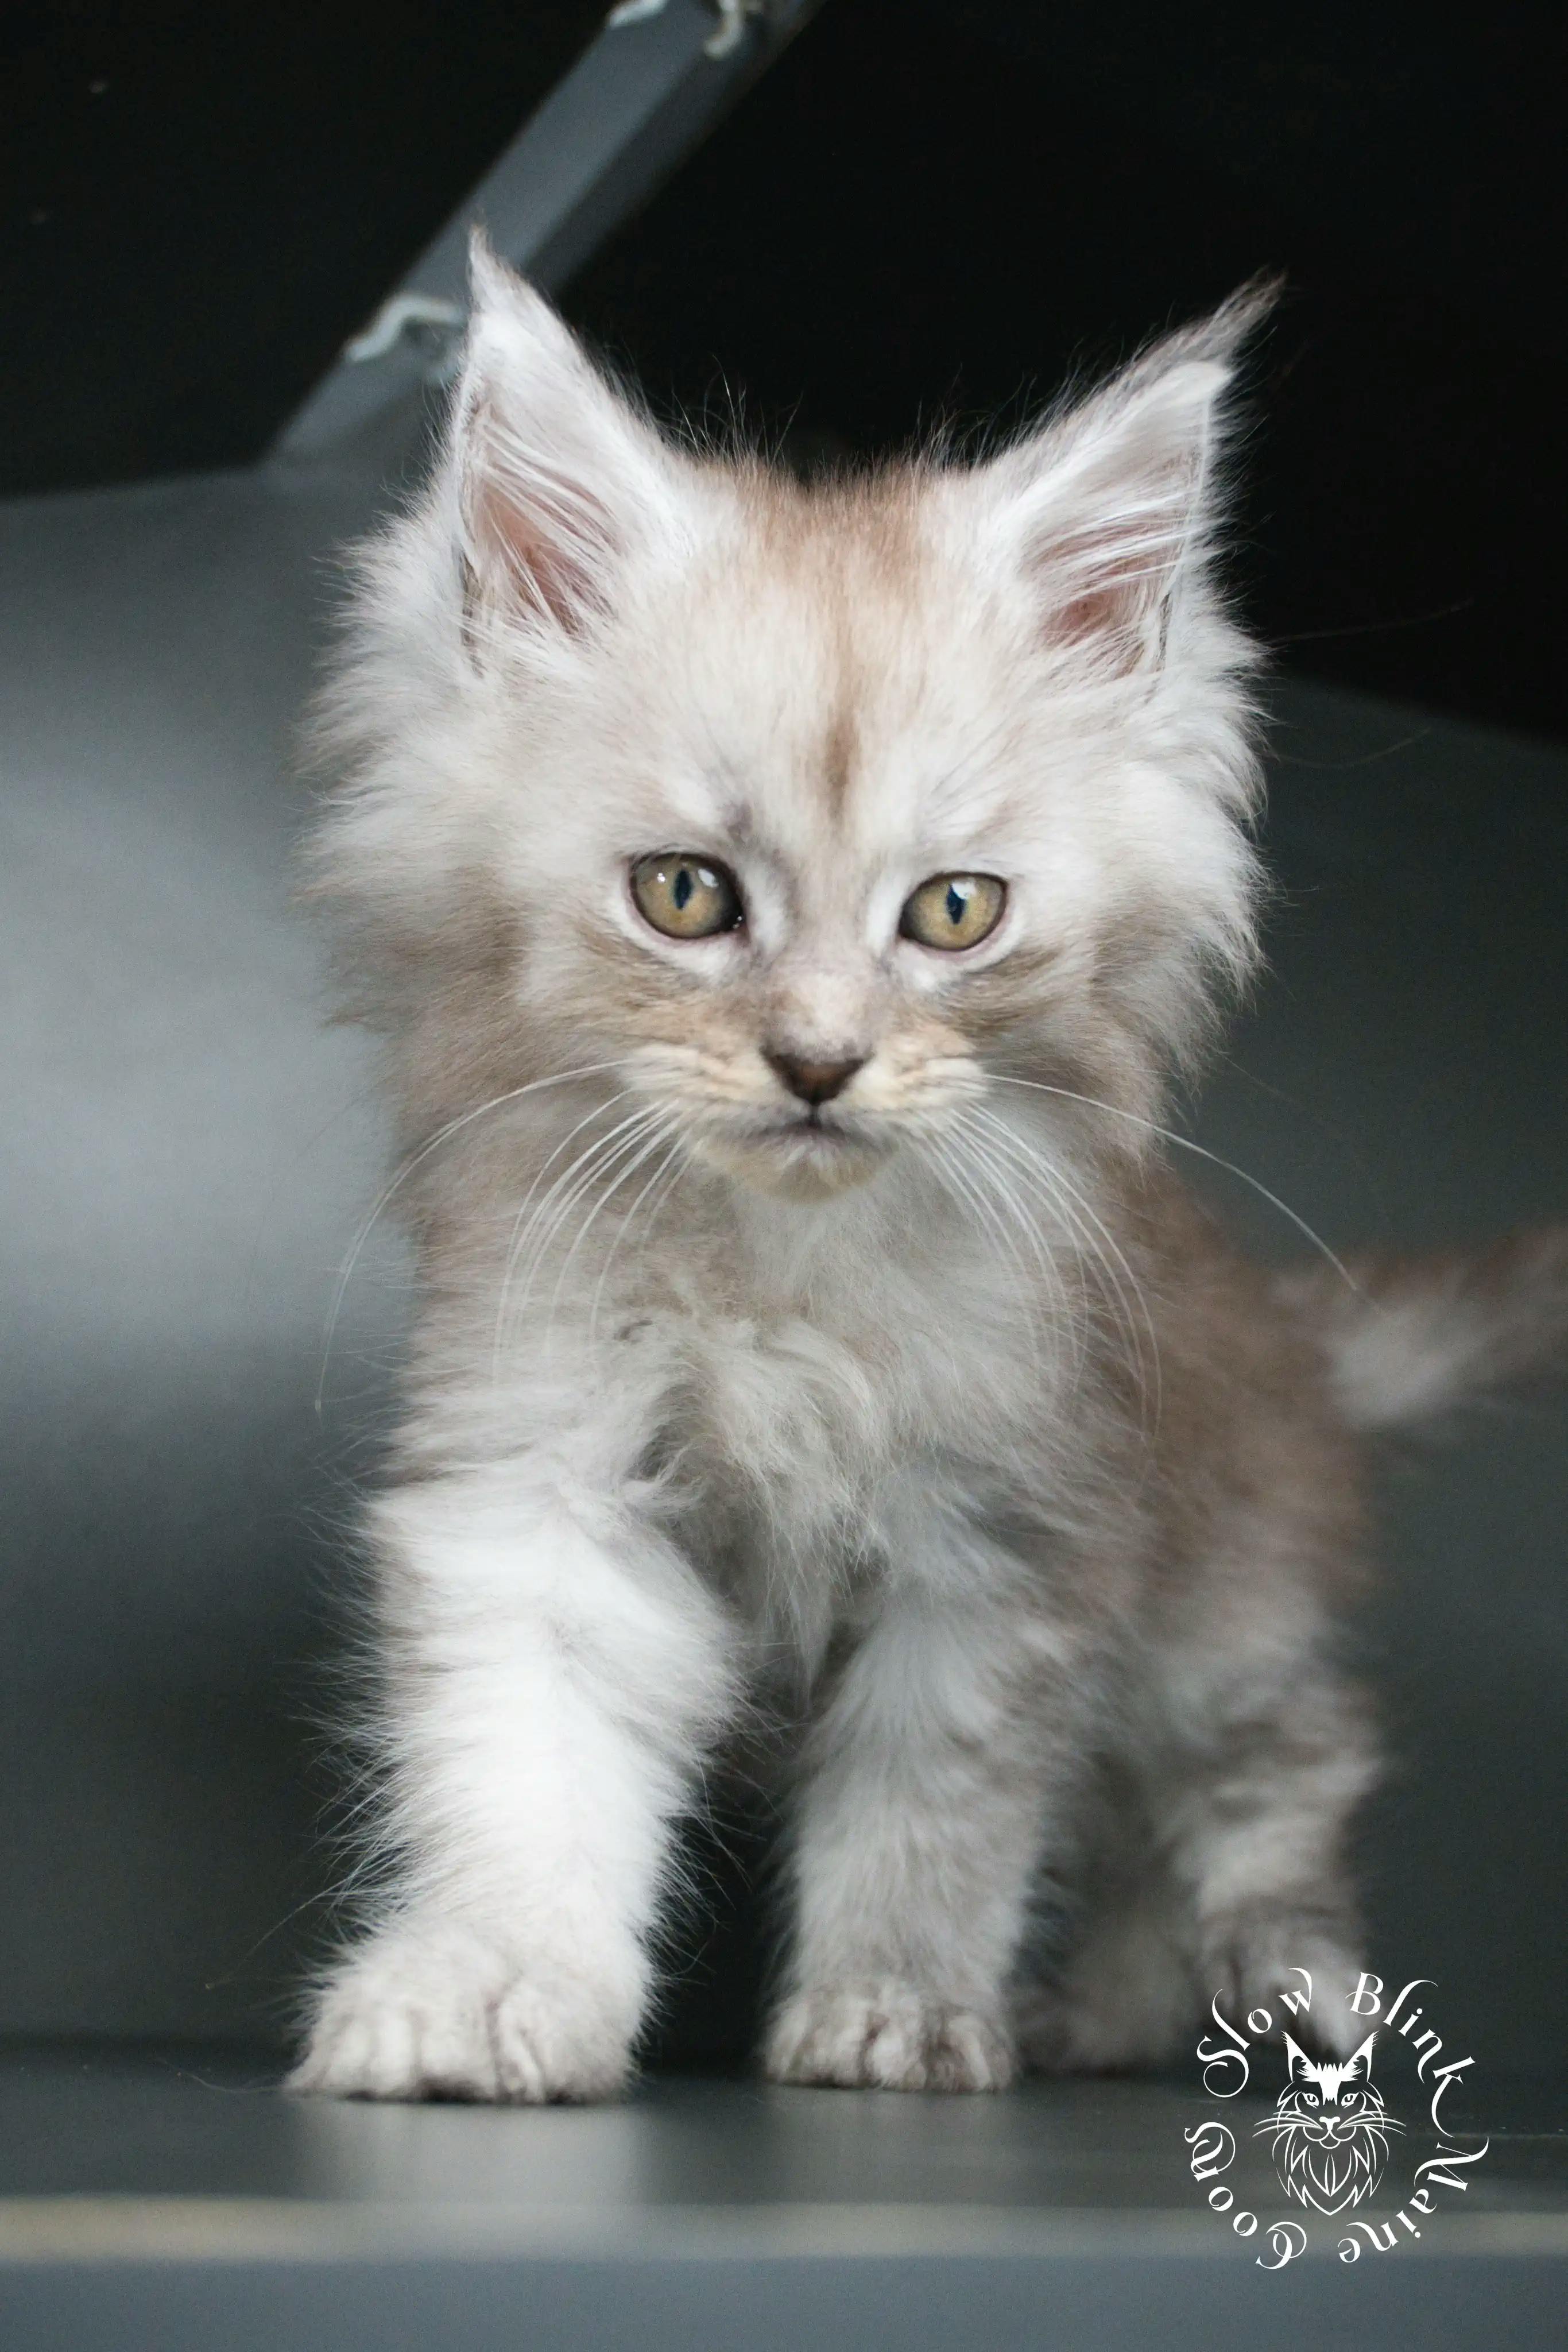 High Silver Maine Coon Kittens > black silver tabby maine coon kitten | ems code ns 22 23 24 25 | slowblinkmainecoons | 374